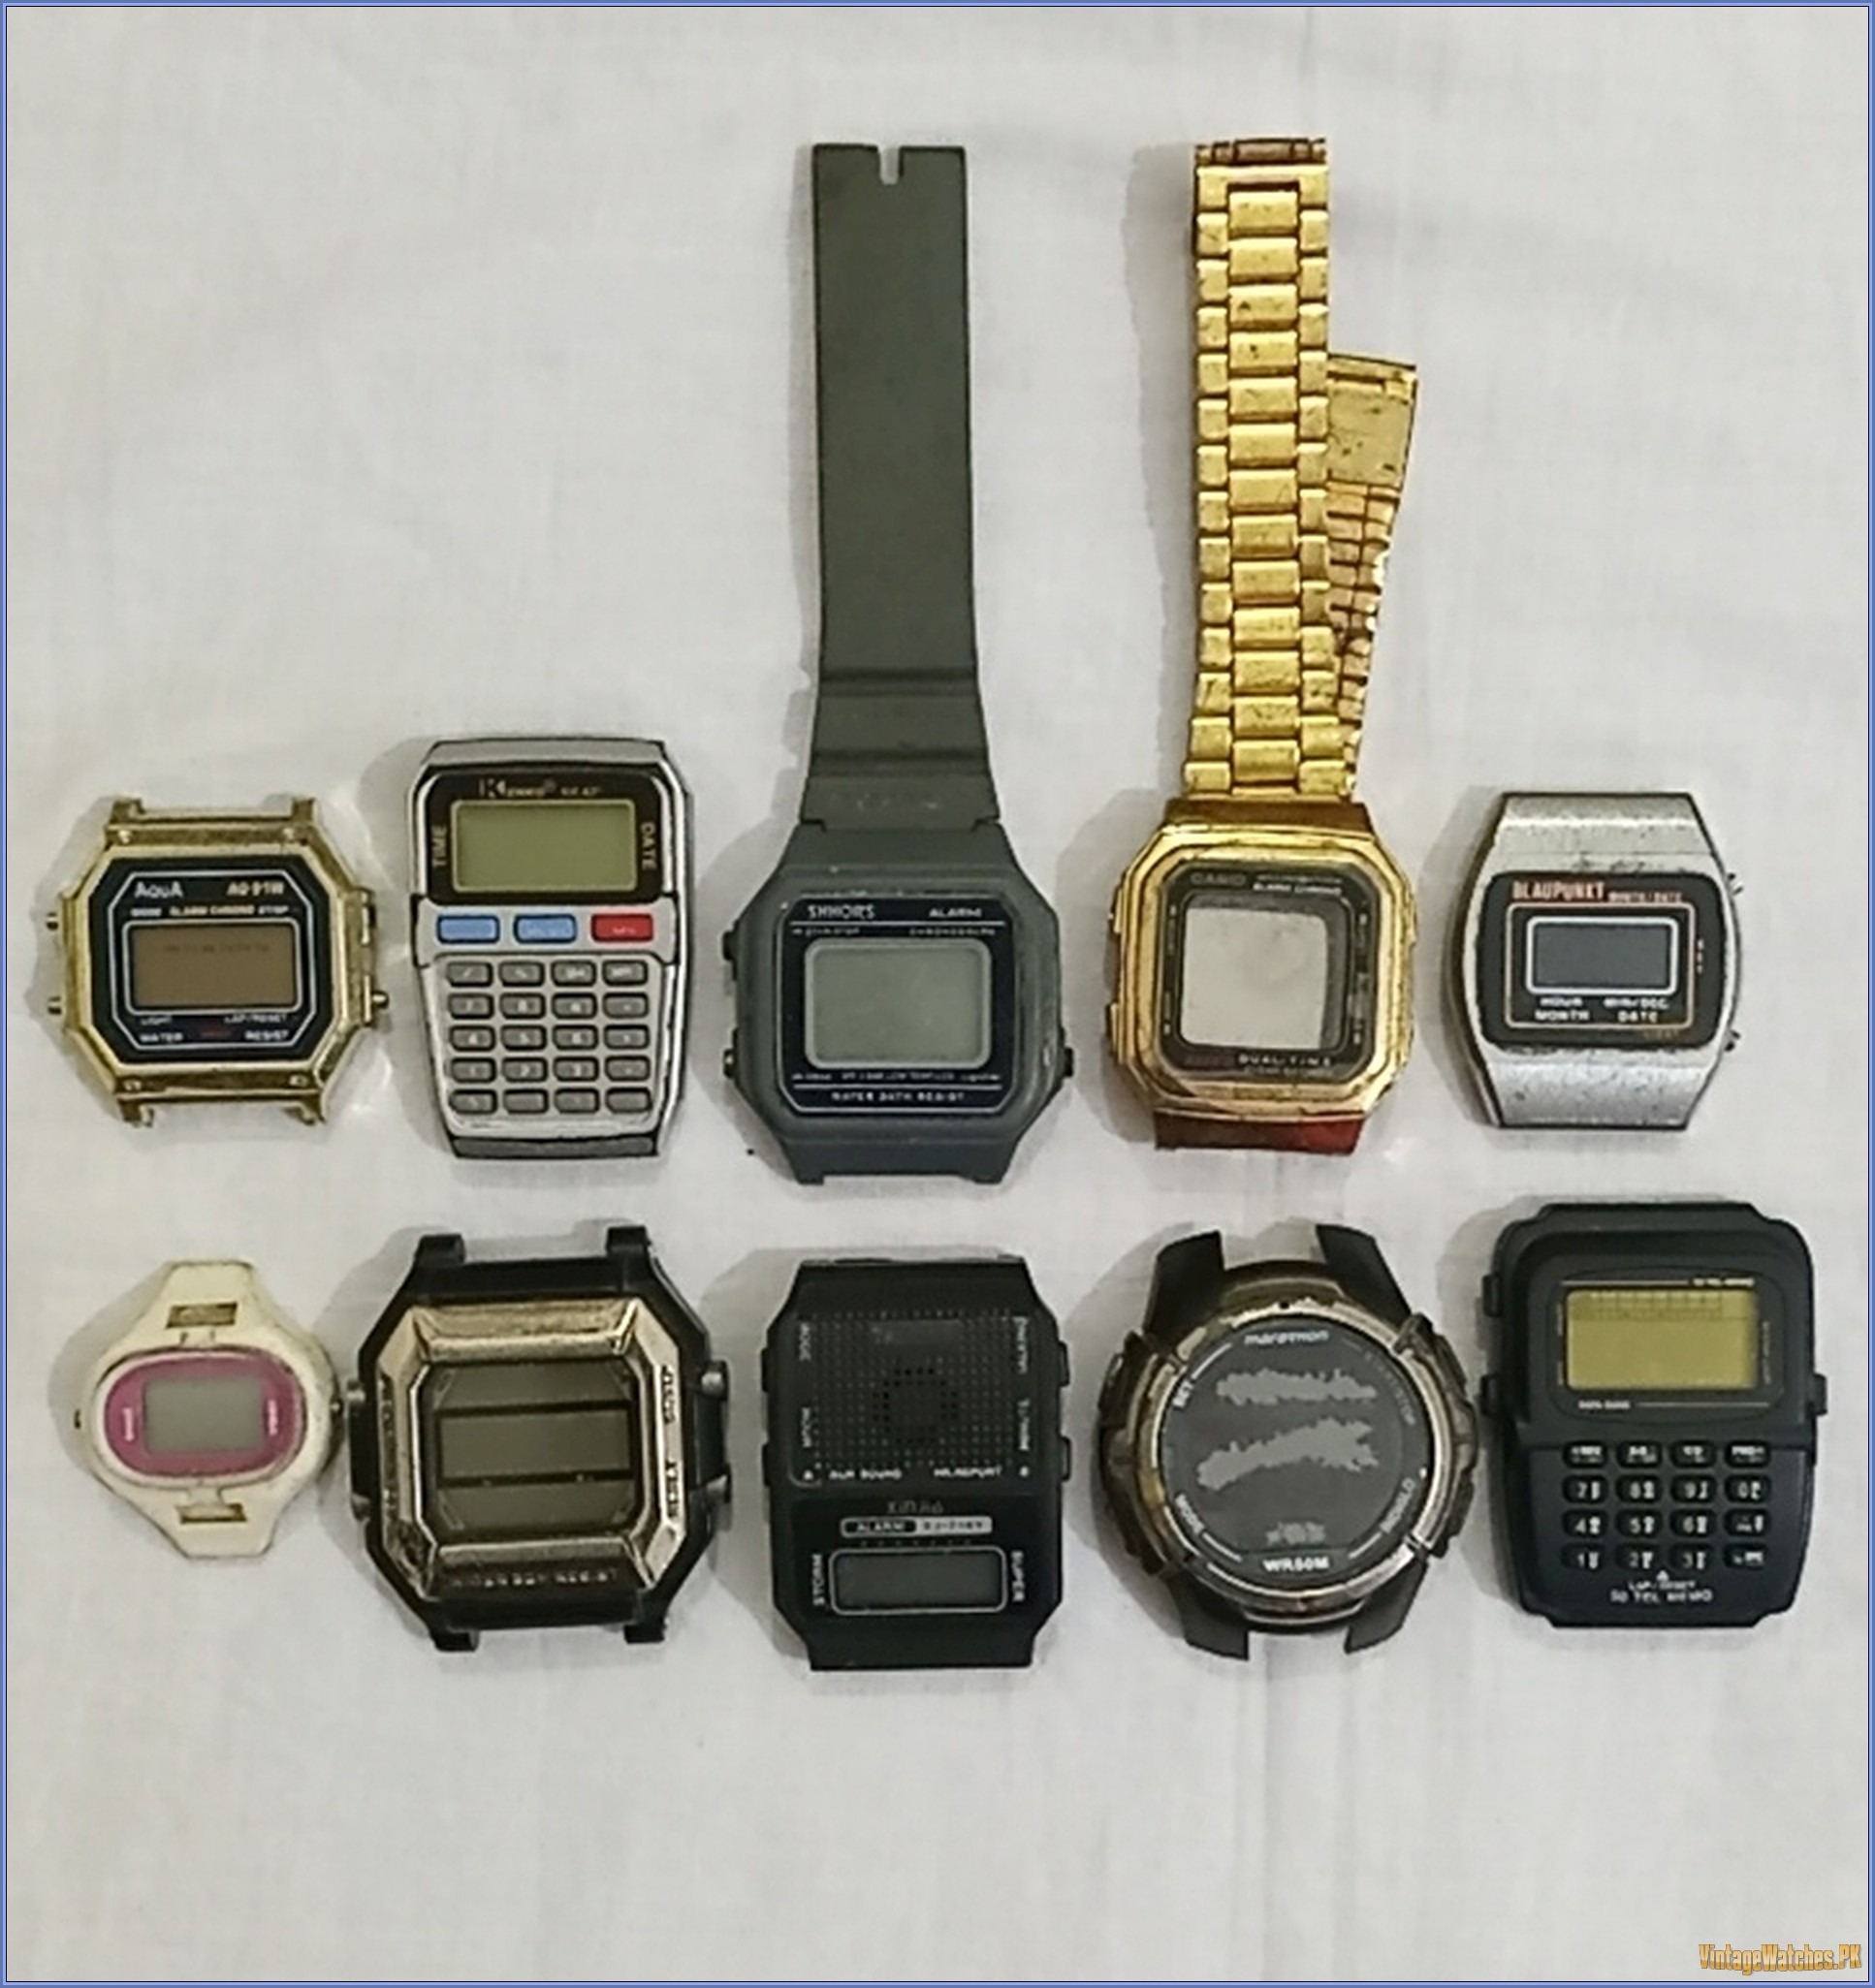 Lot of 10 Vintage Antique Digital LCD Calculator Watches Clocks China - PK00013-IMG_20221020_191052_5 - VintageWatches.PK